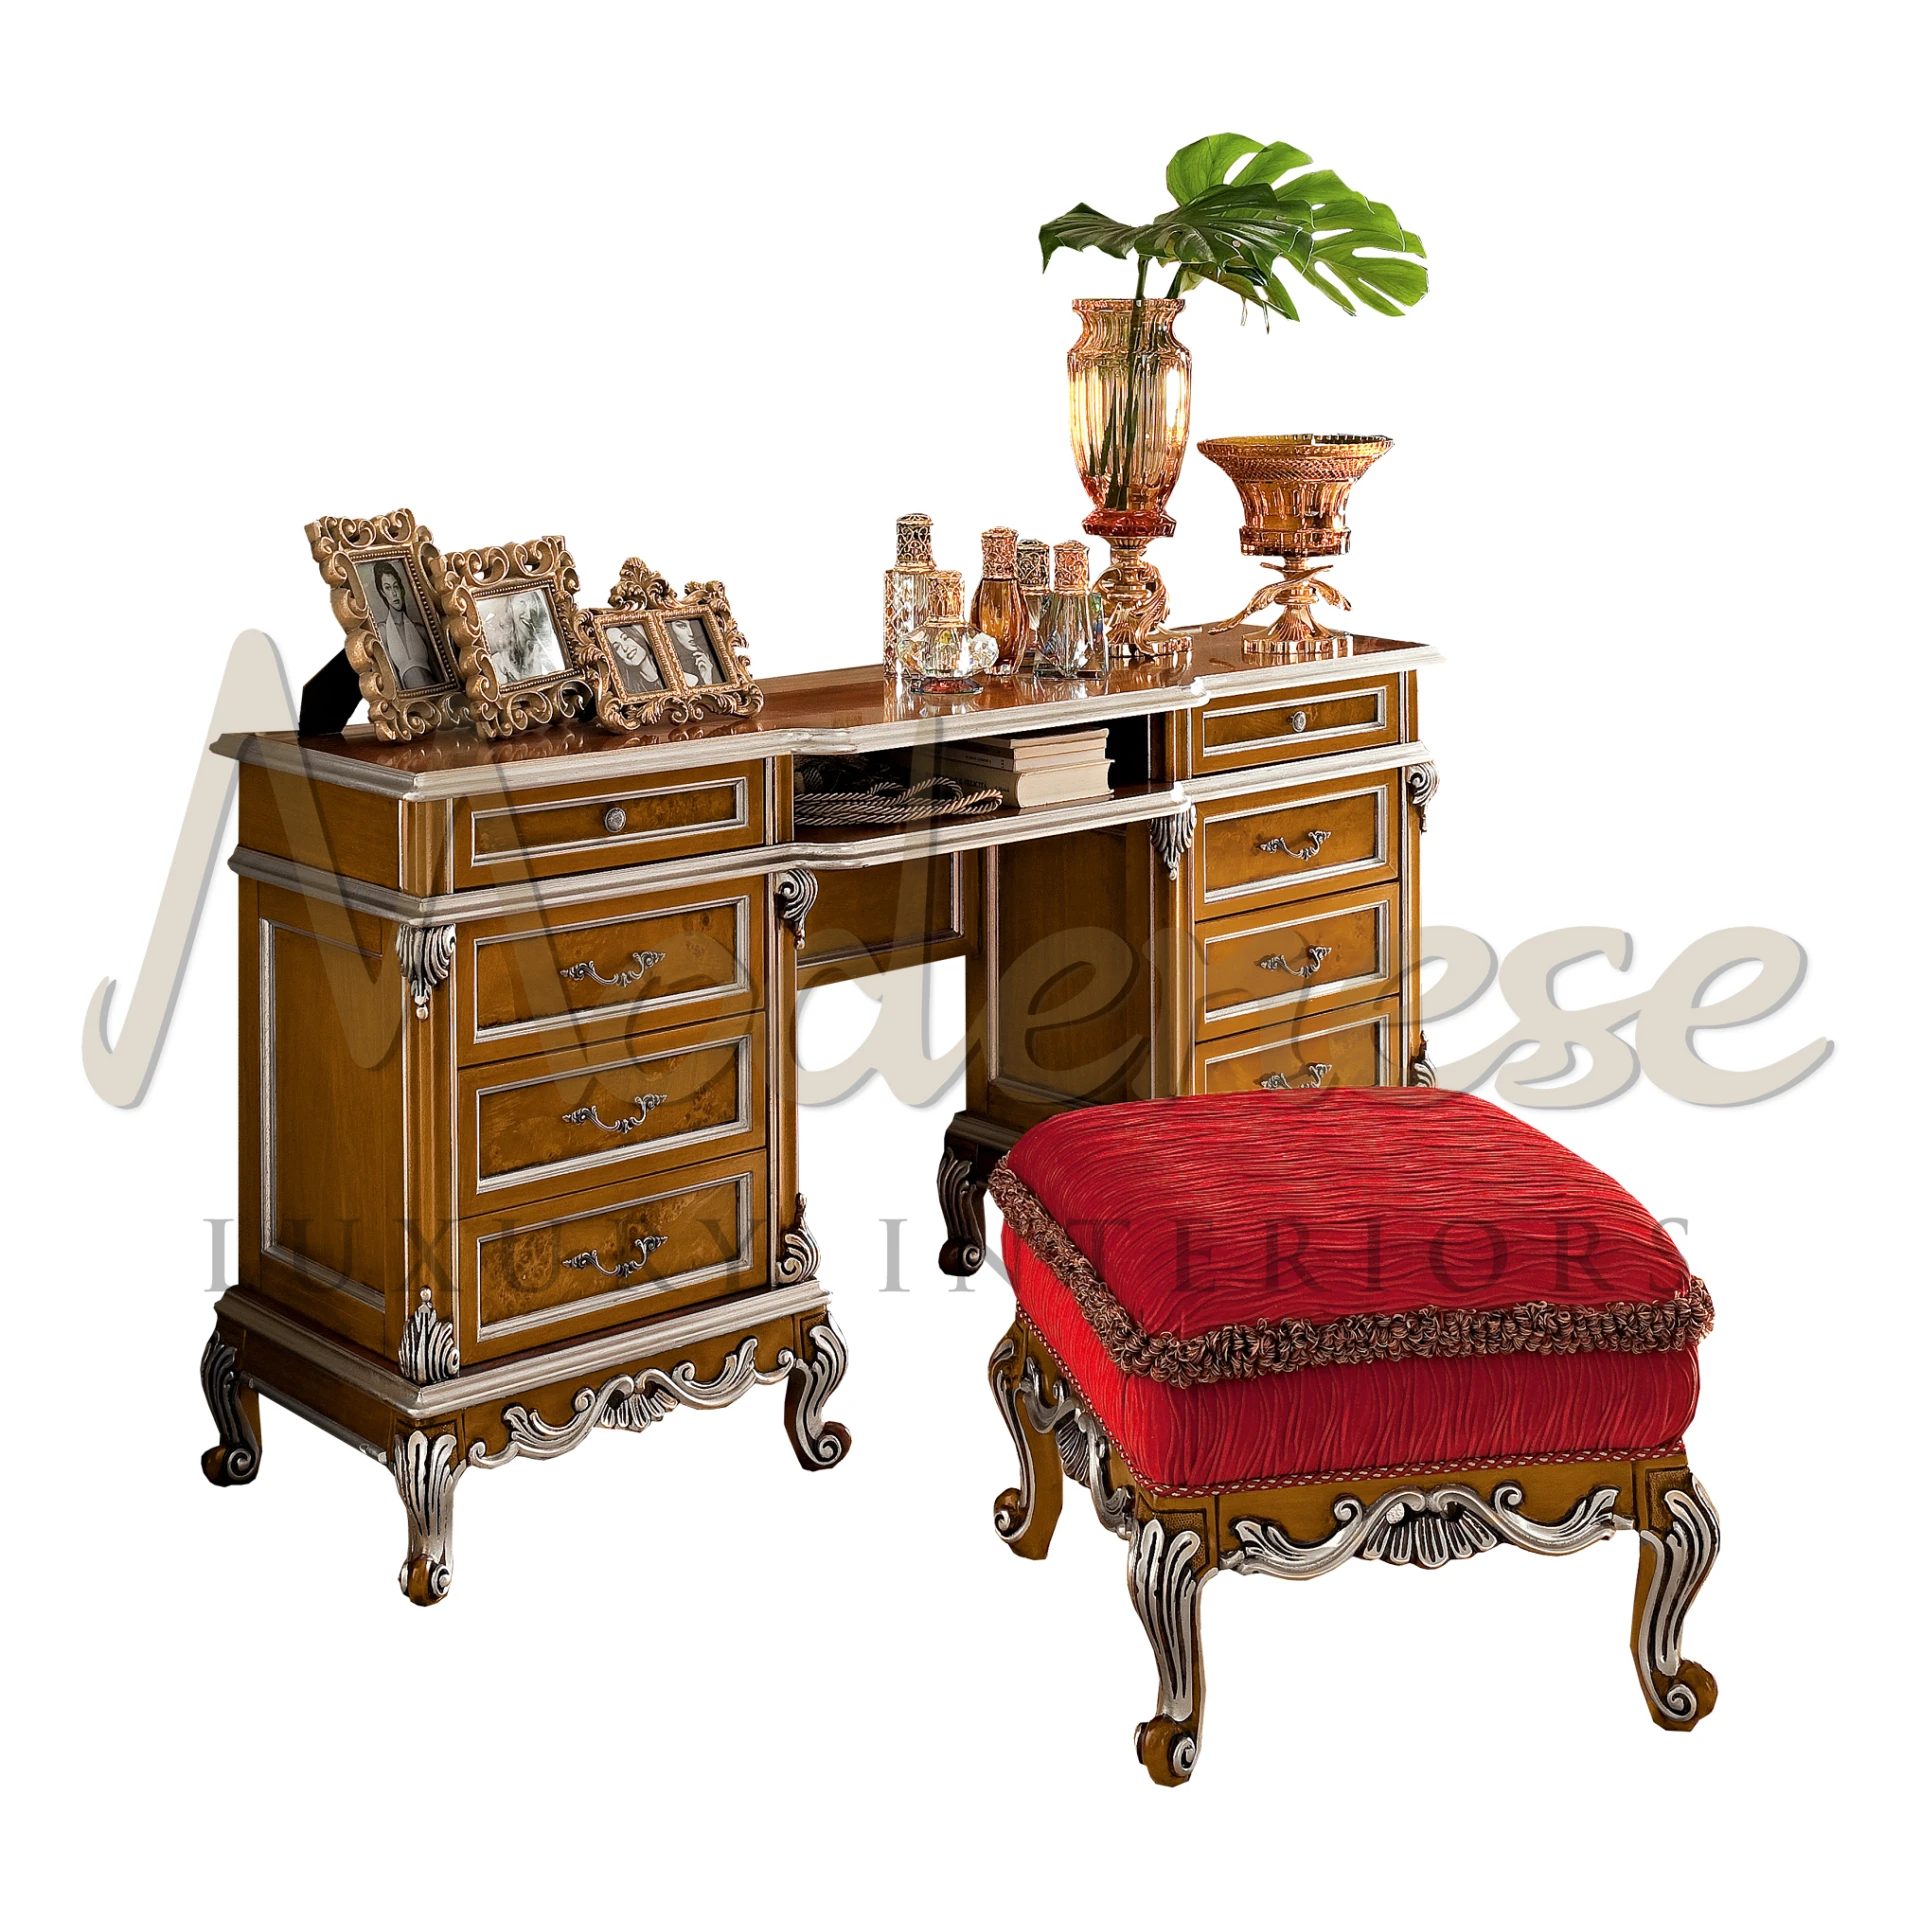 Richly detailed dressing table with brass accents and a regal red stool, showcasing a collection of ornate perfume bottles and framed photographs.